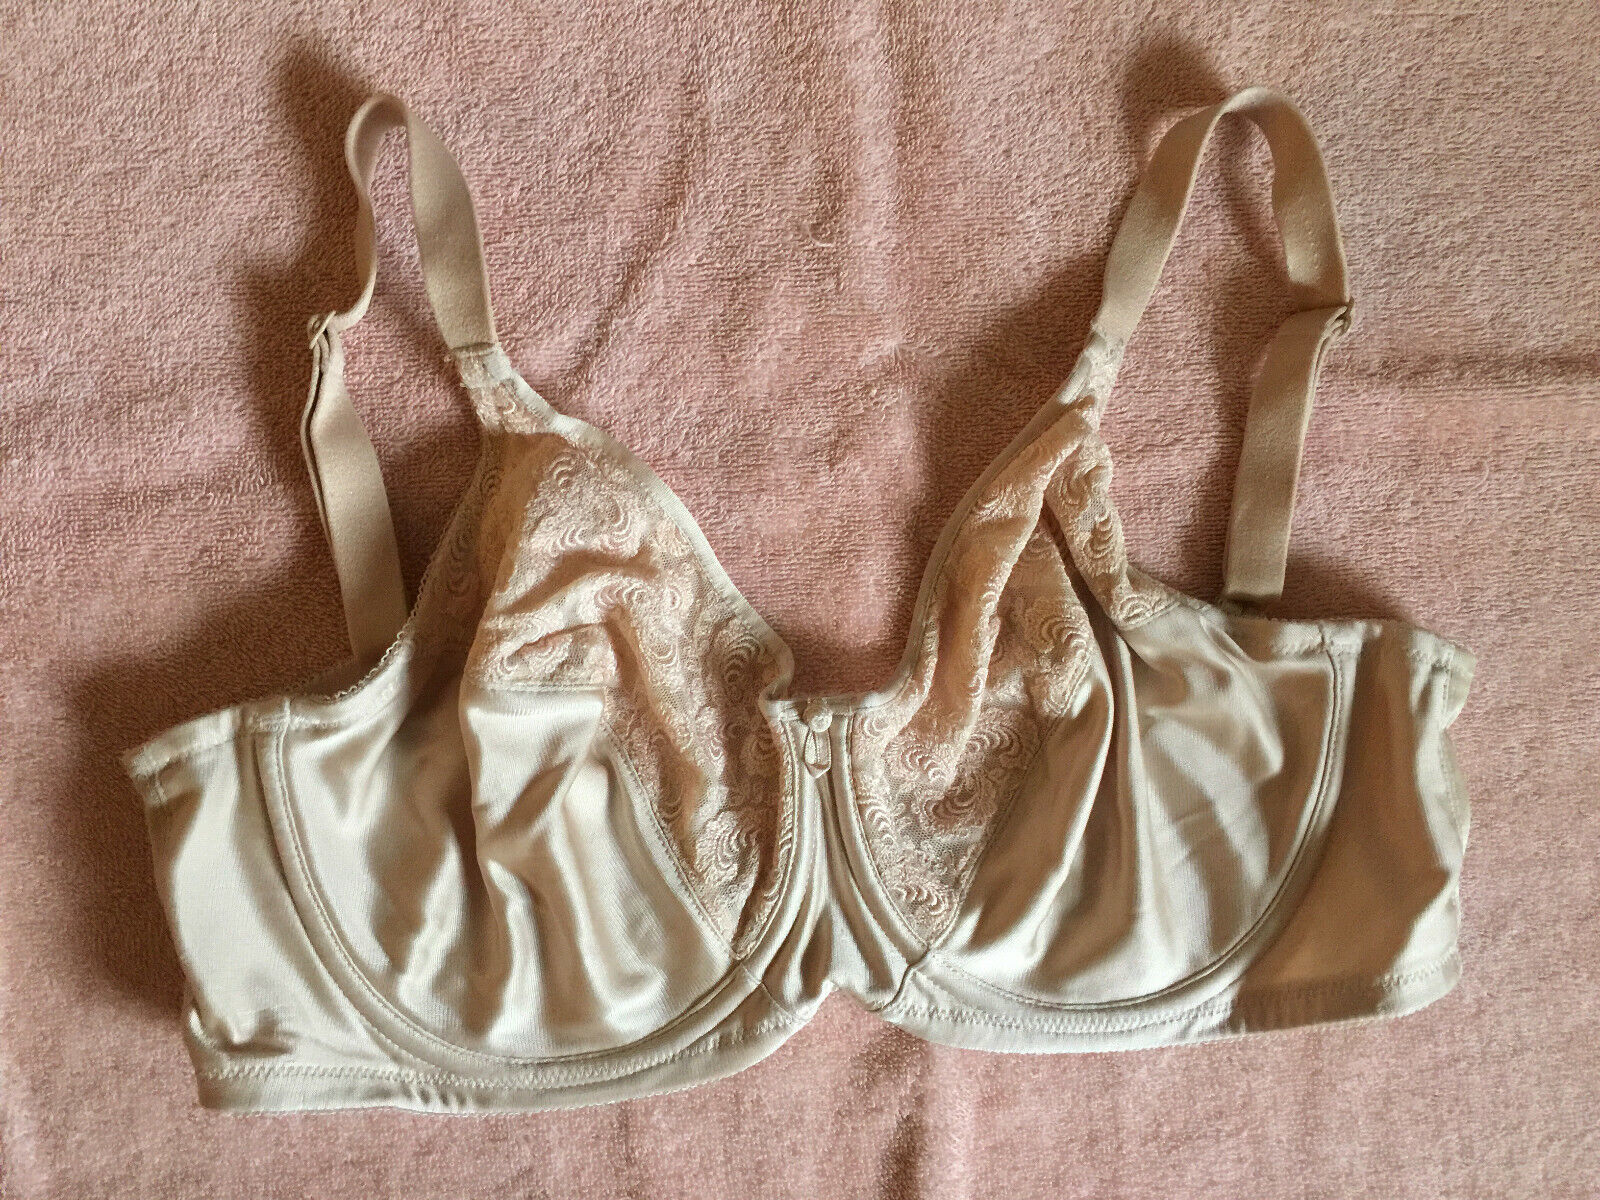 34DD WACOAL 85101 Womens UW Lace Full Cup and 50 similar items